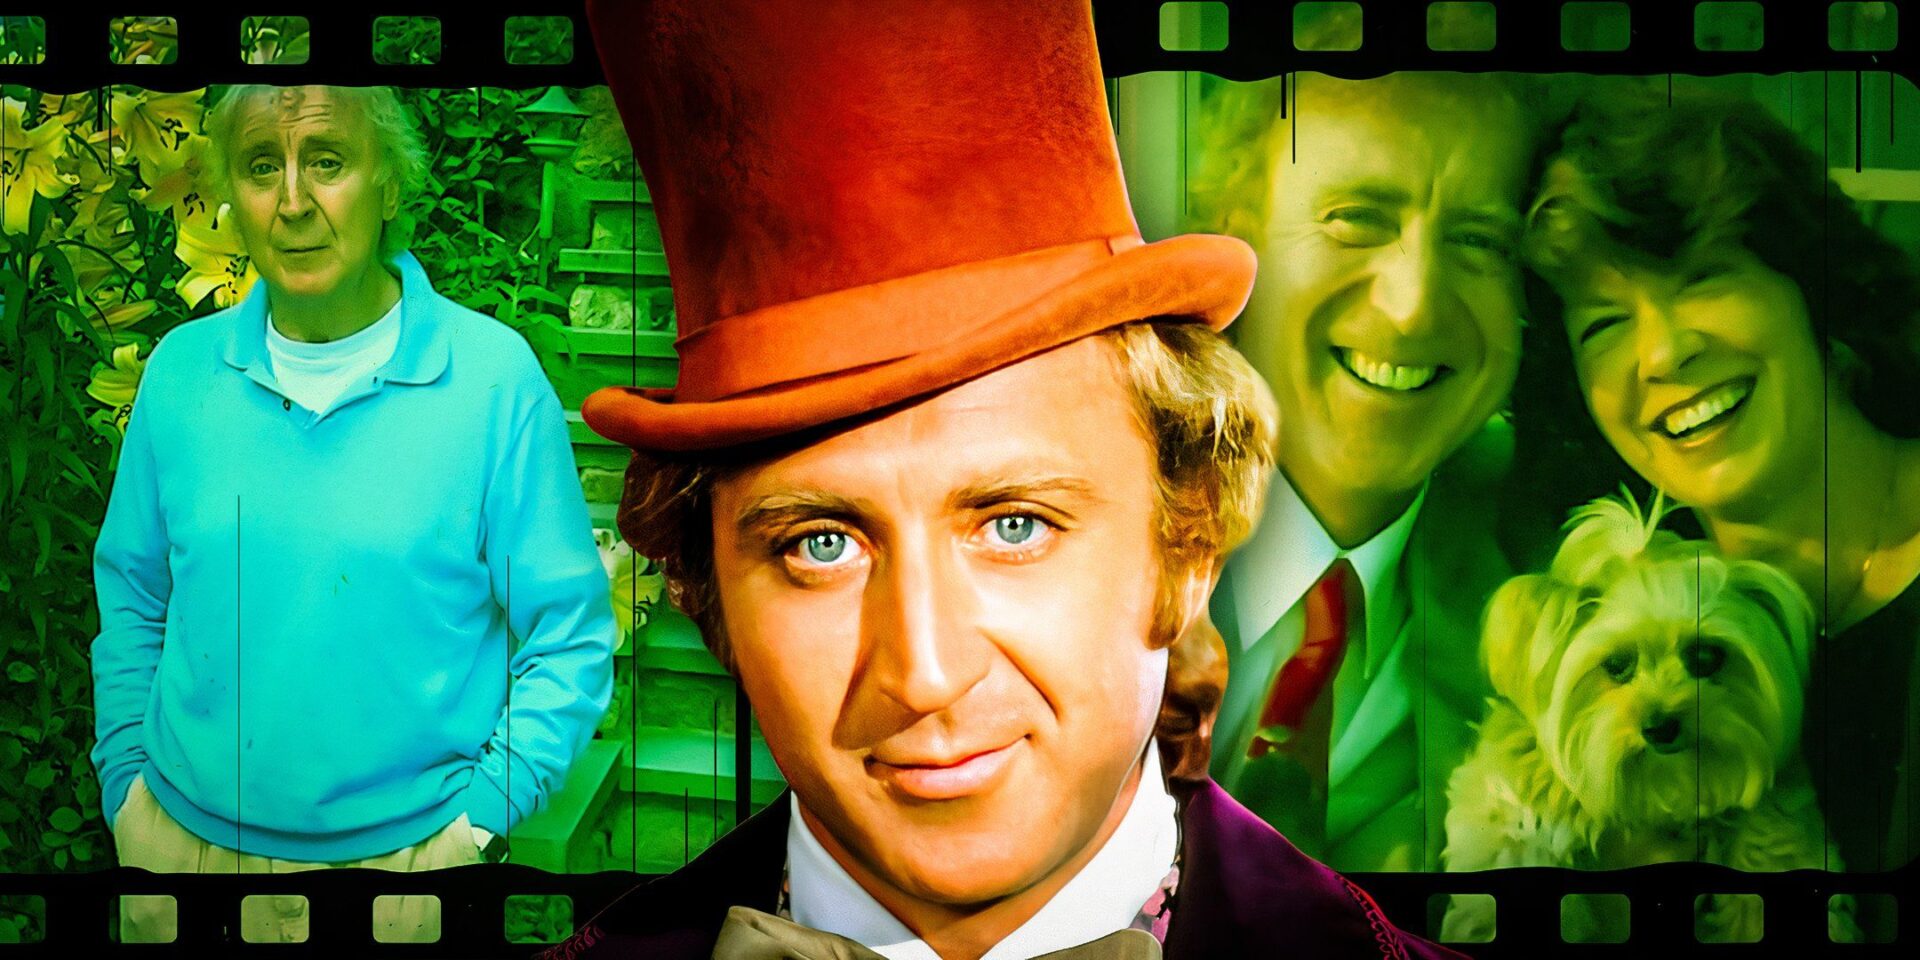 10 Biggest Reveals From The Remembering Gene Wilder Documentary